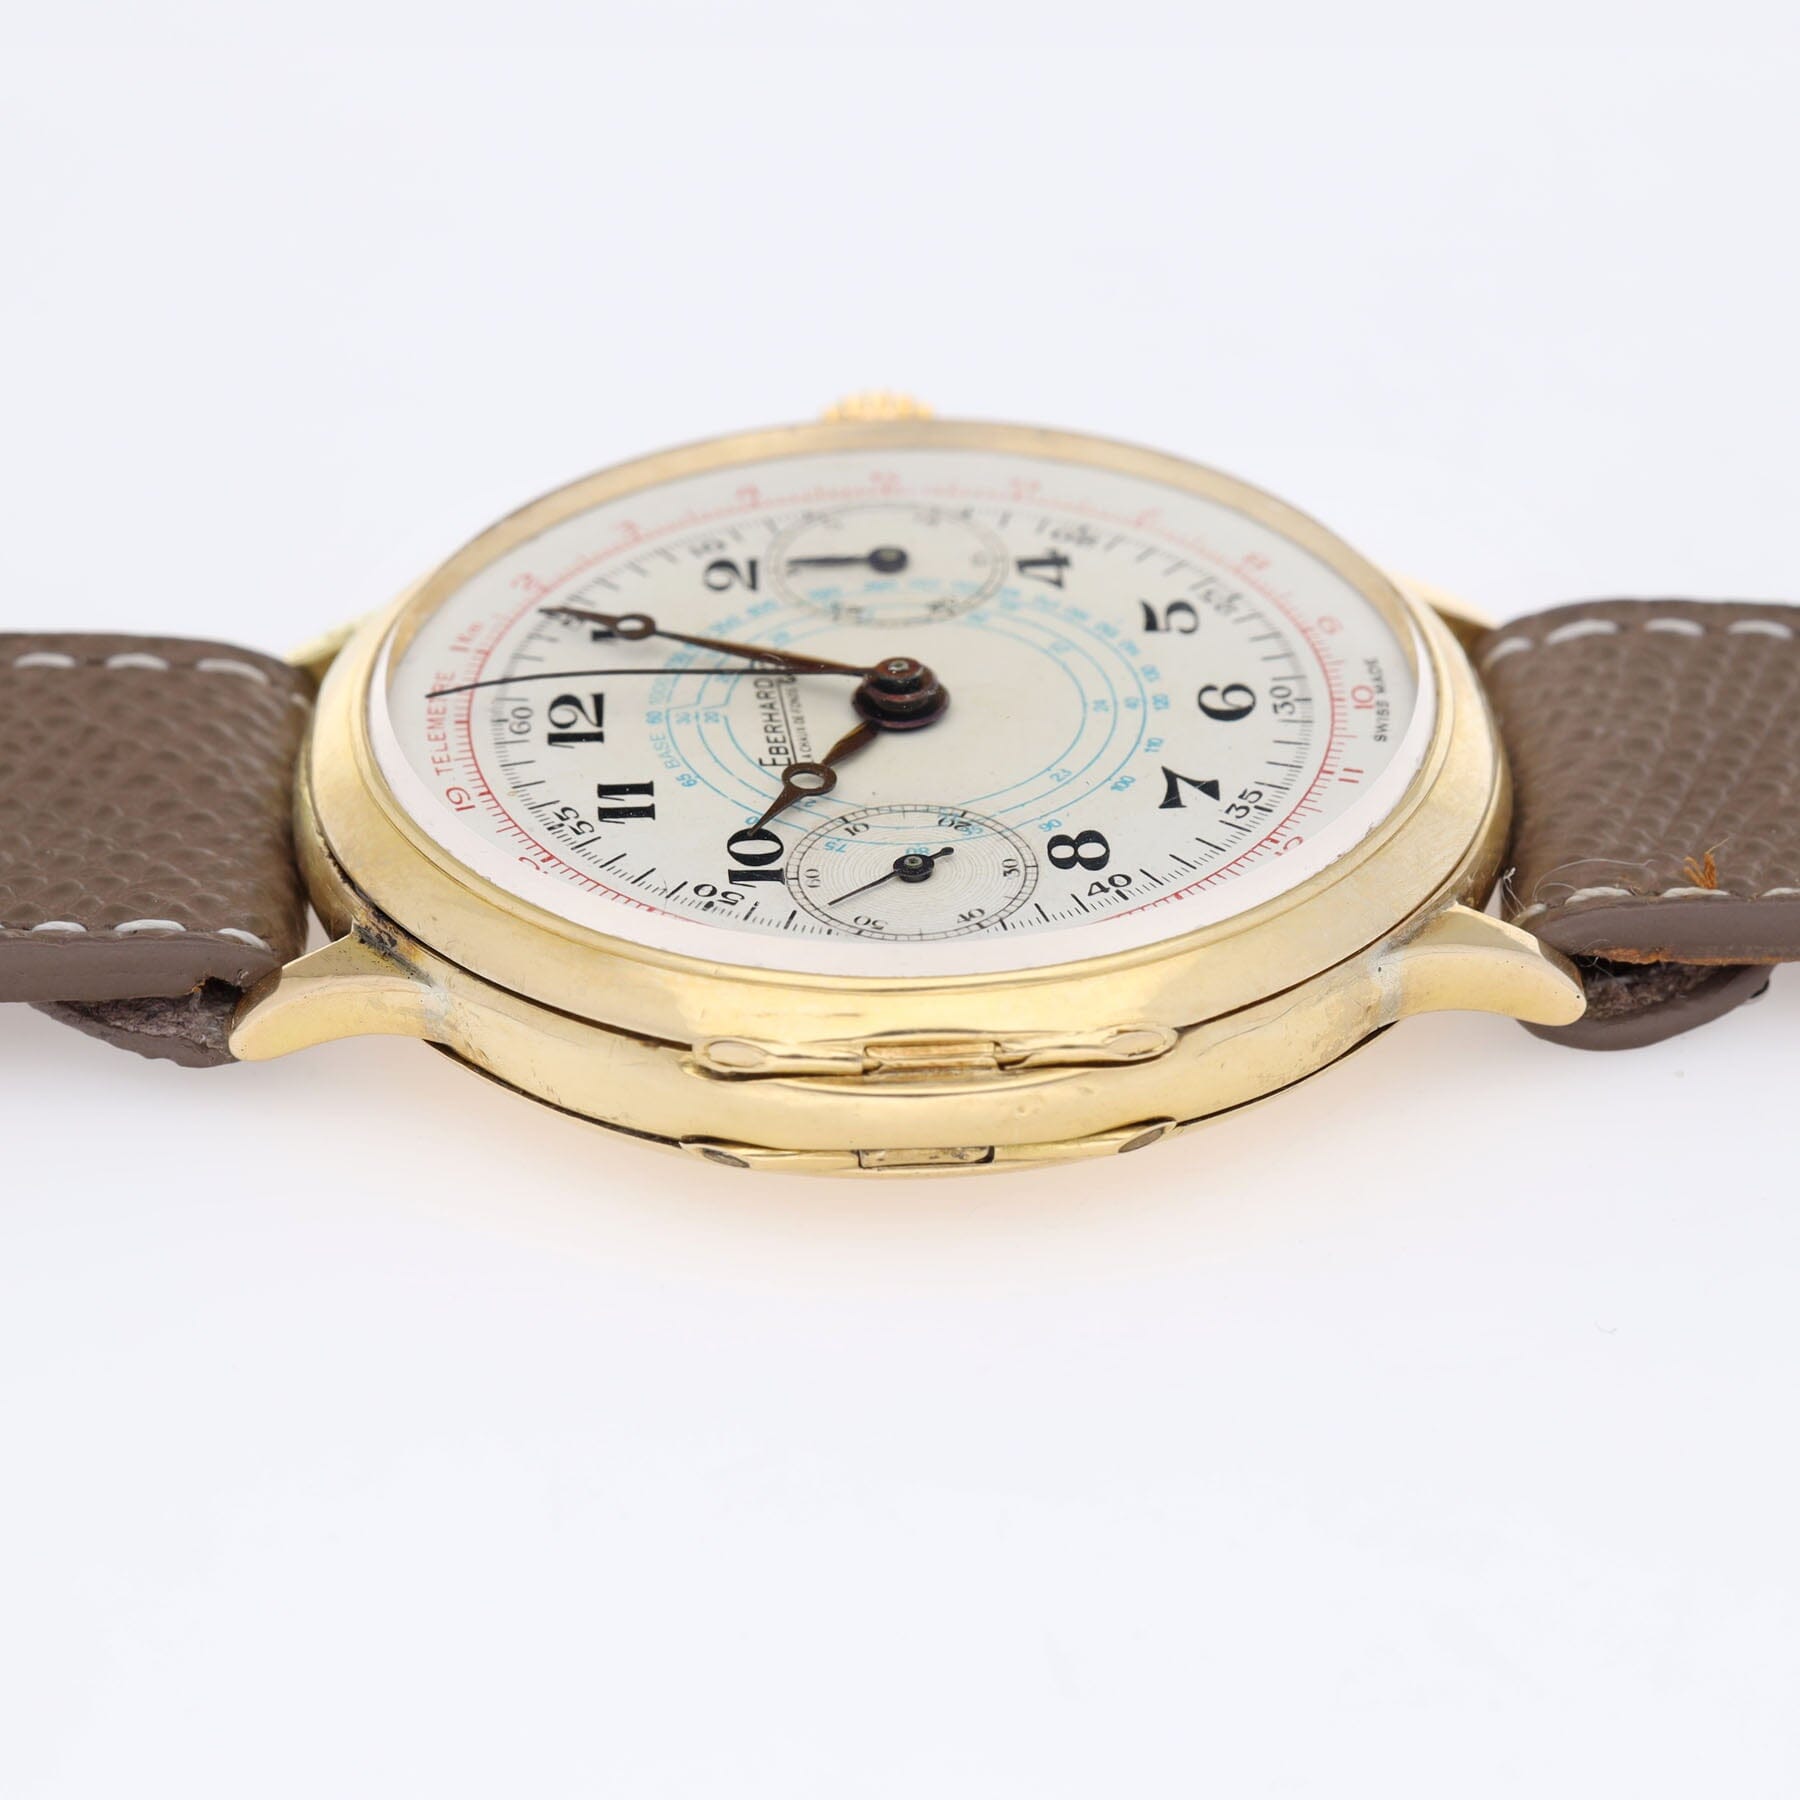 Eberhard & Co Monopusher Pre Extra Fort Chronograph 18k Yellow Gold